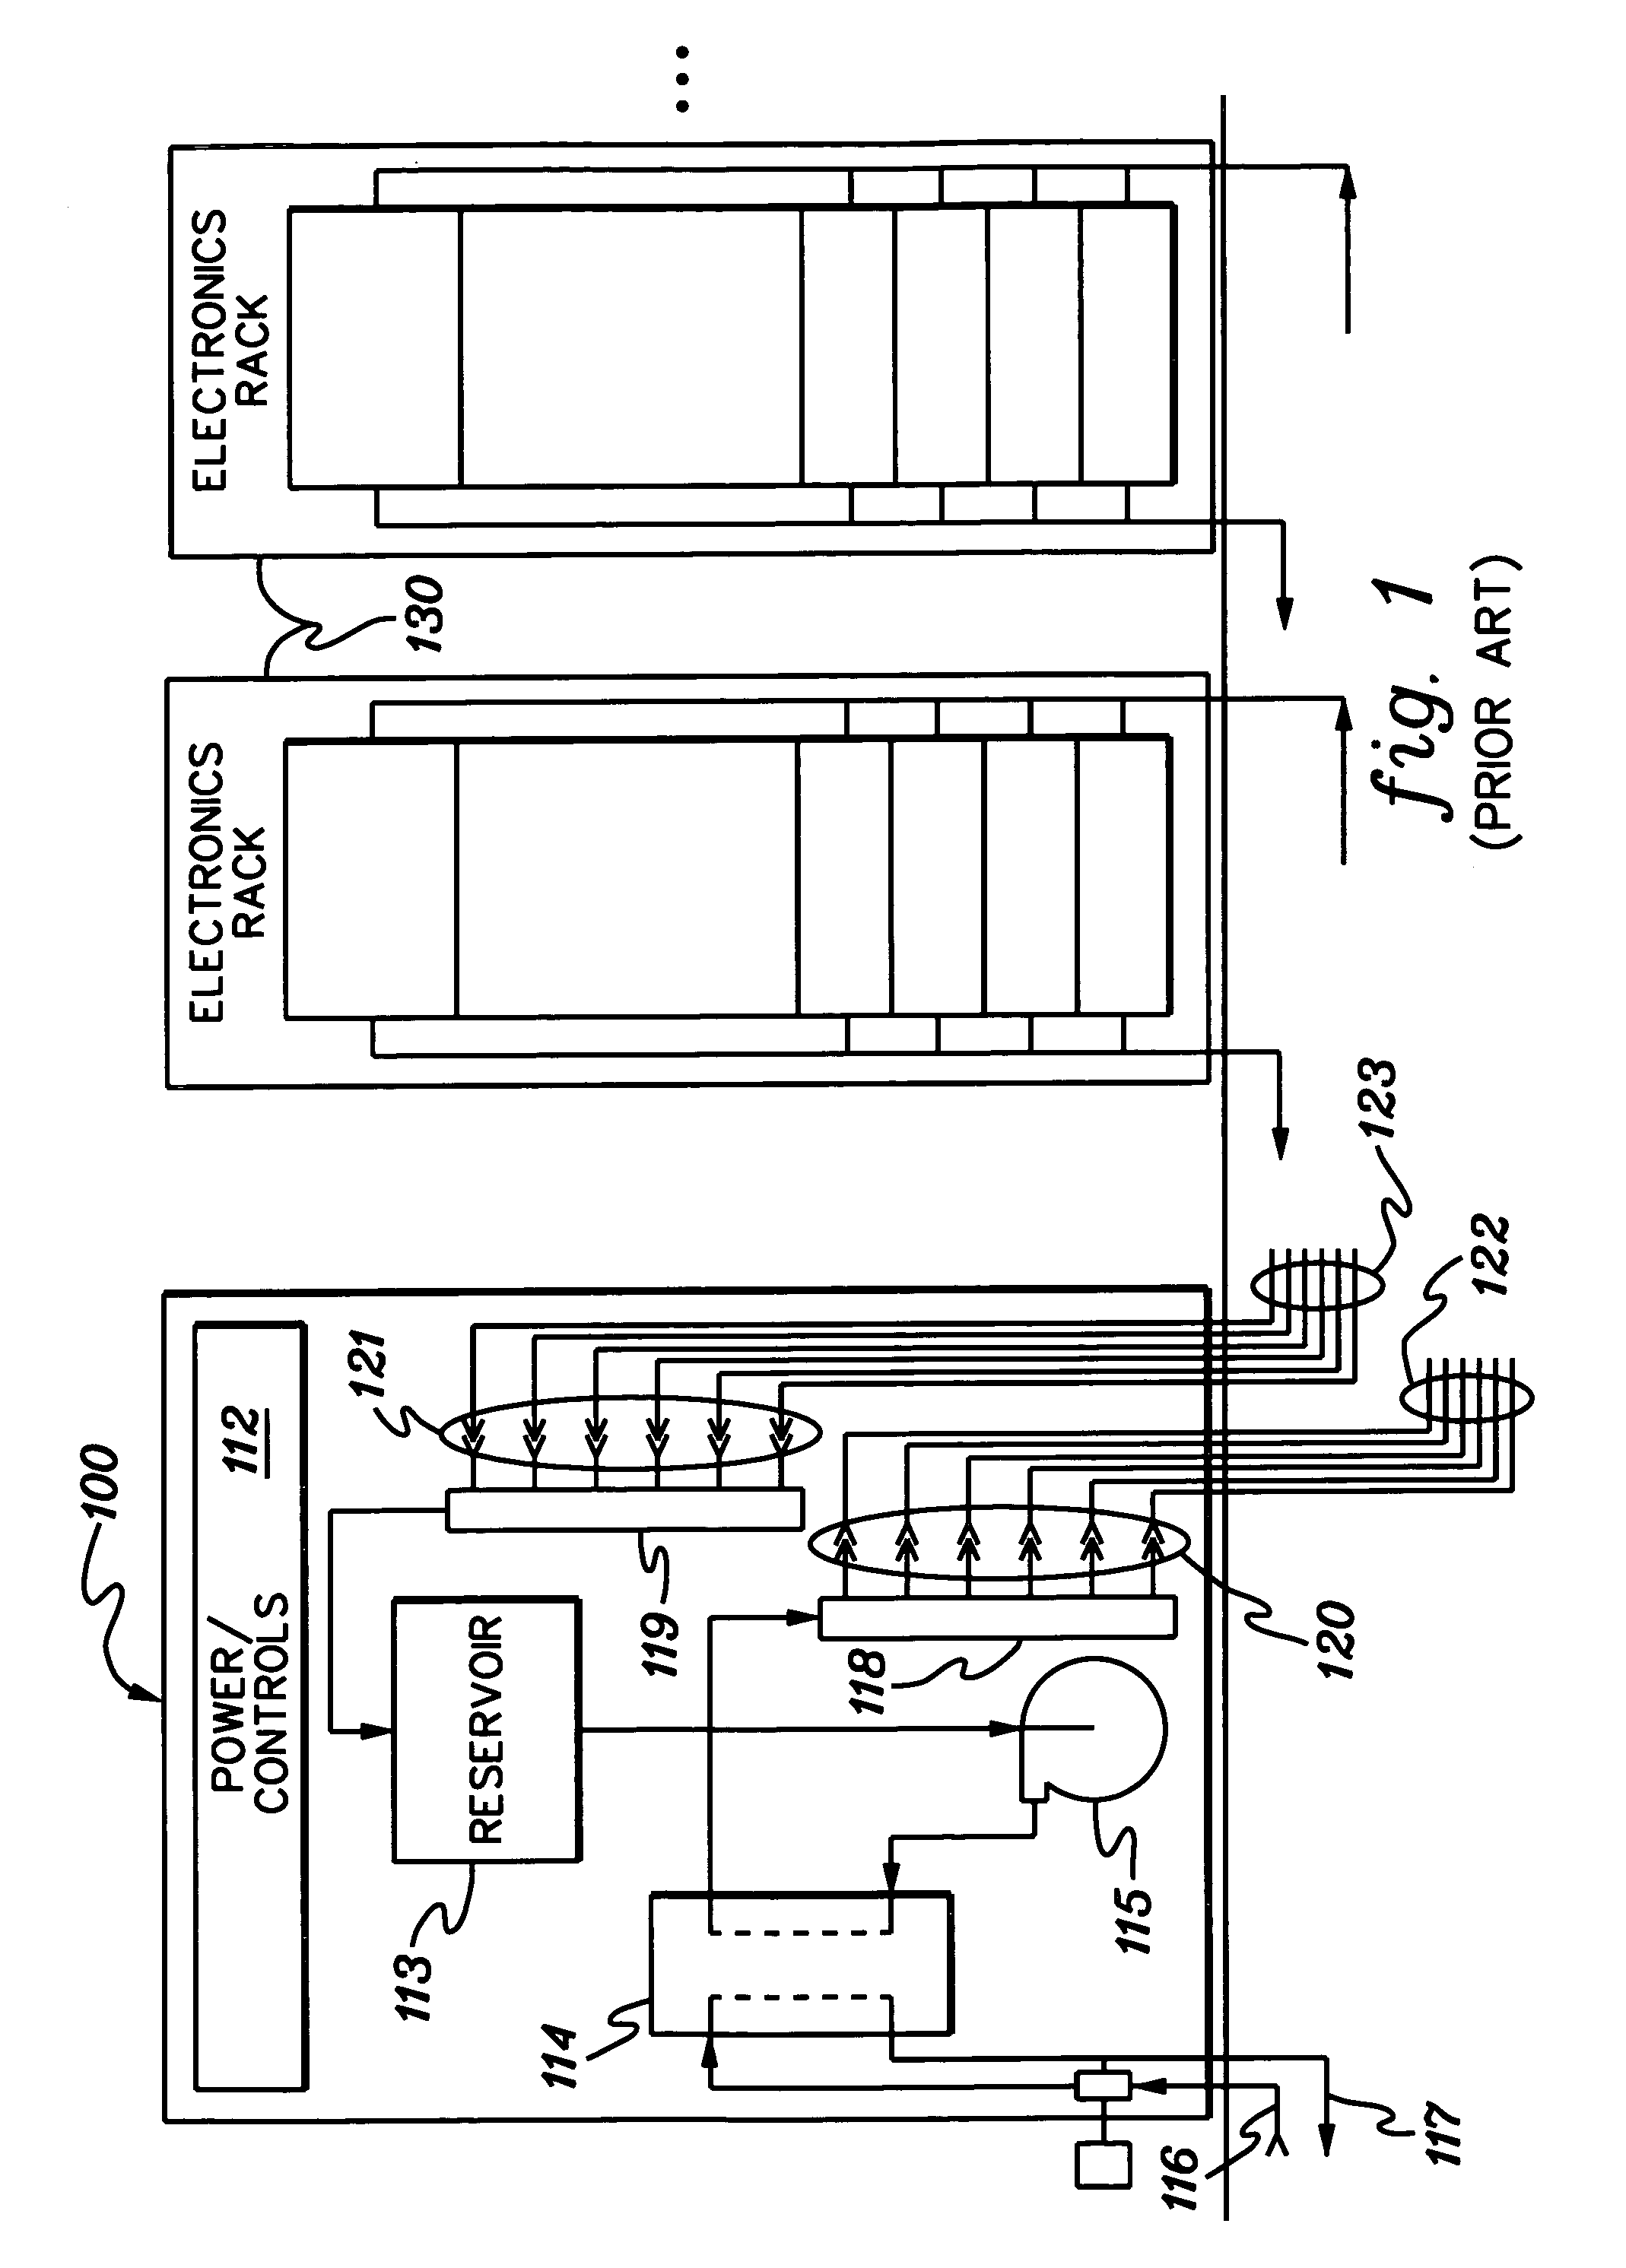 Method, system and program product for monitoring rate of volume change of coolant within a cooling system